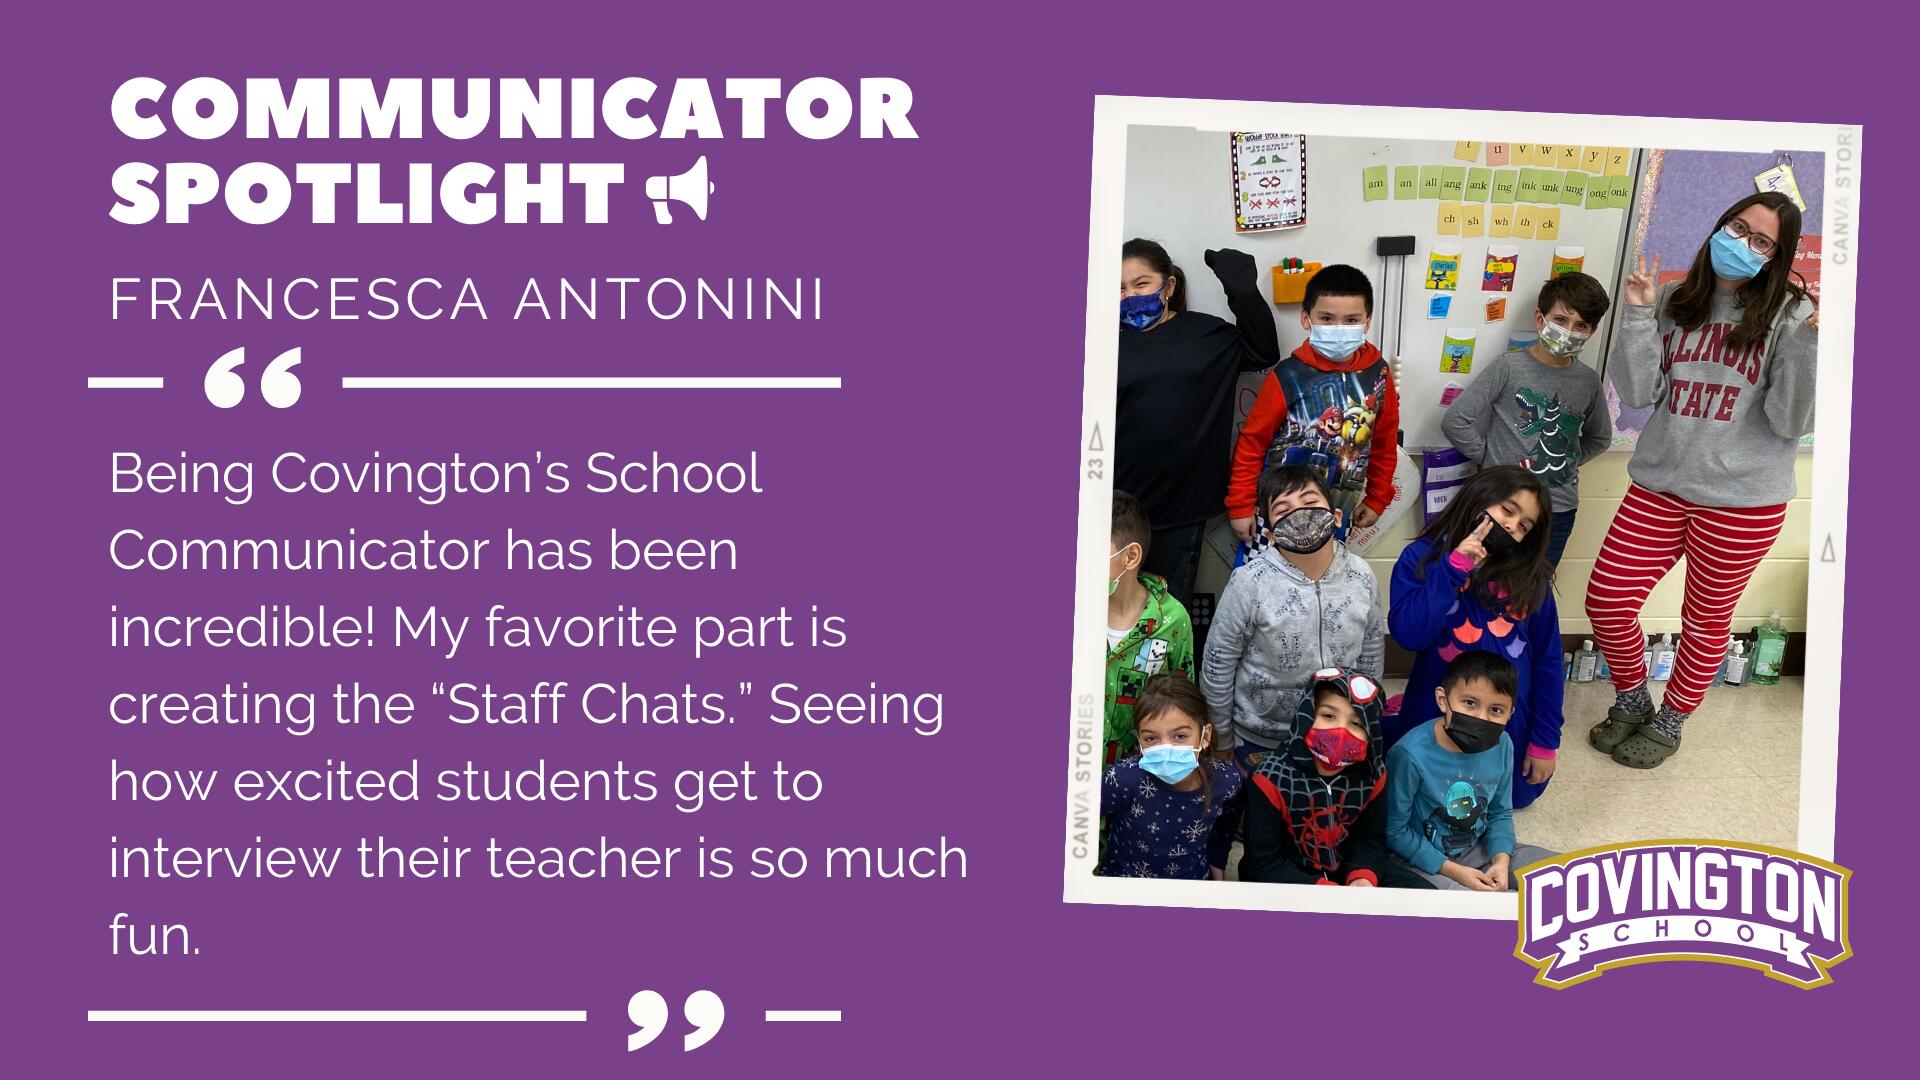 Being Covington’s School Communicator has been incredible! My favorite part is creating the “Staff Chats.” Seeing how excited students get to interview their teacher is so much fun.